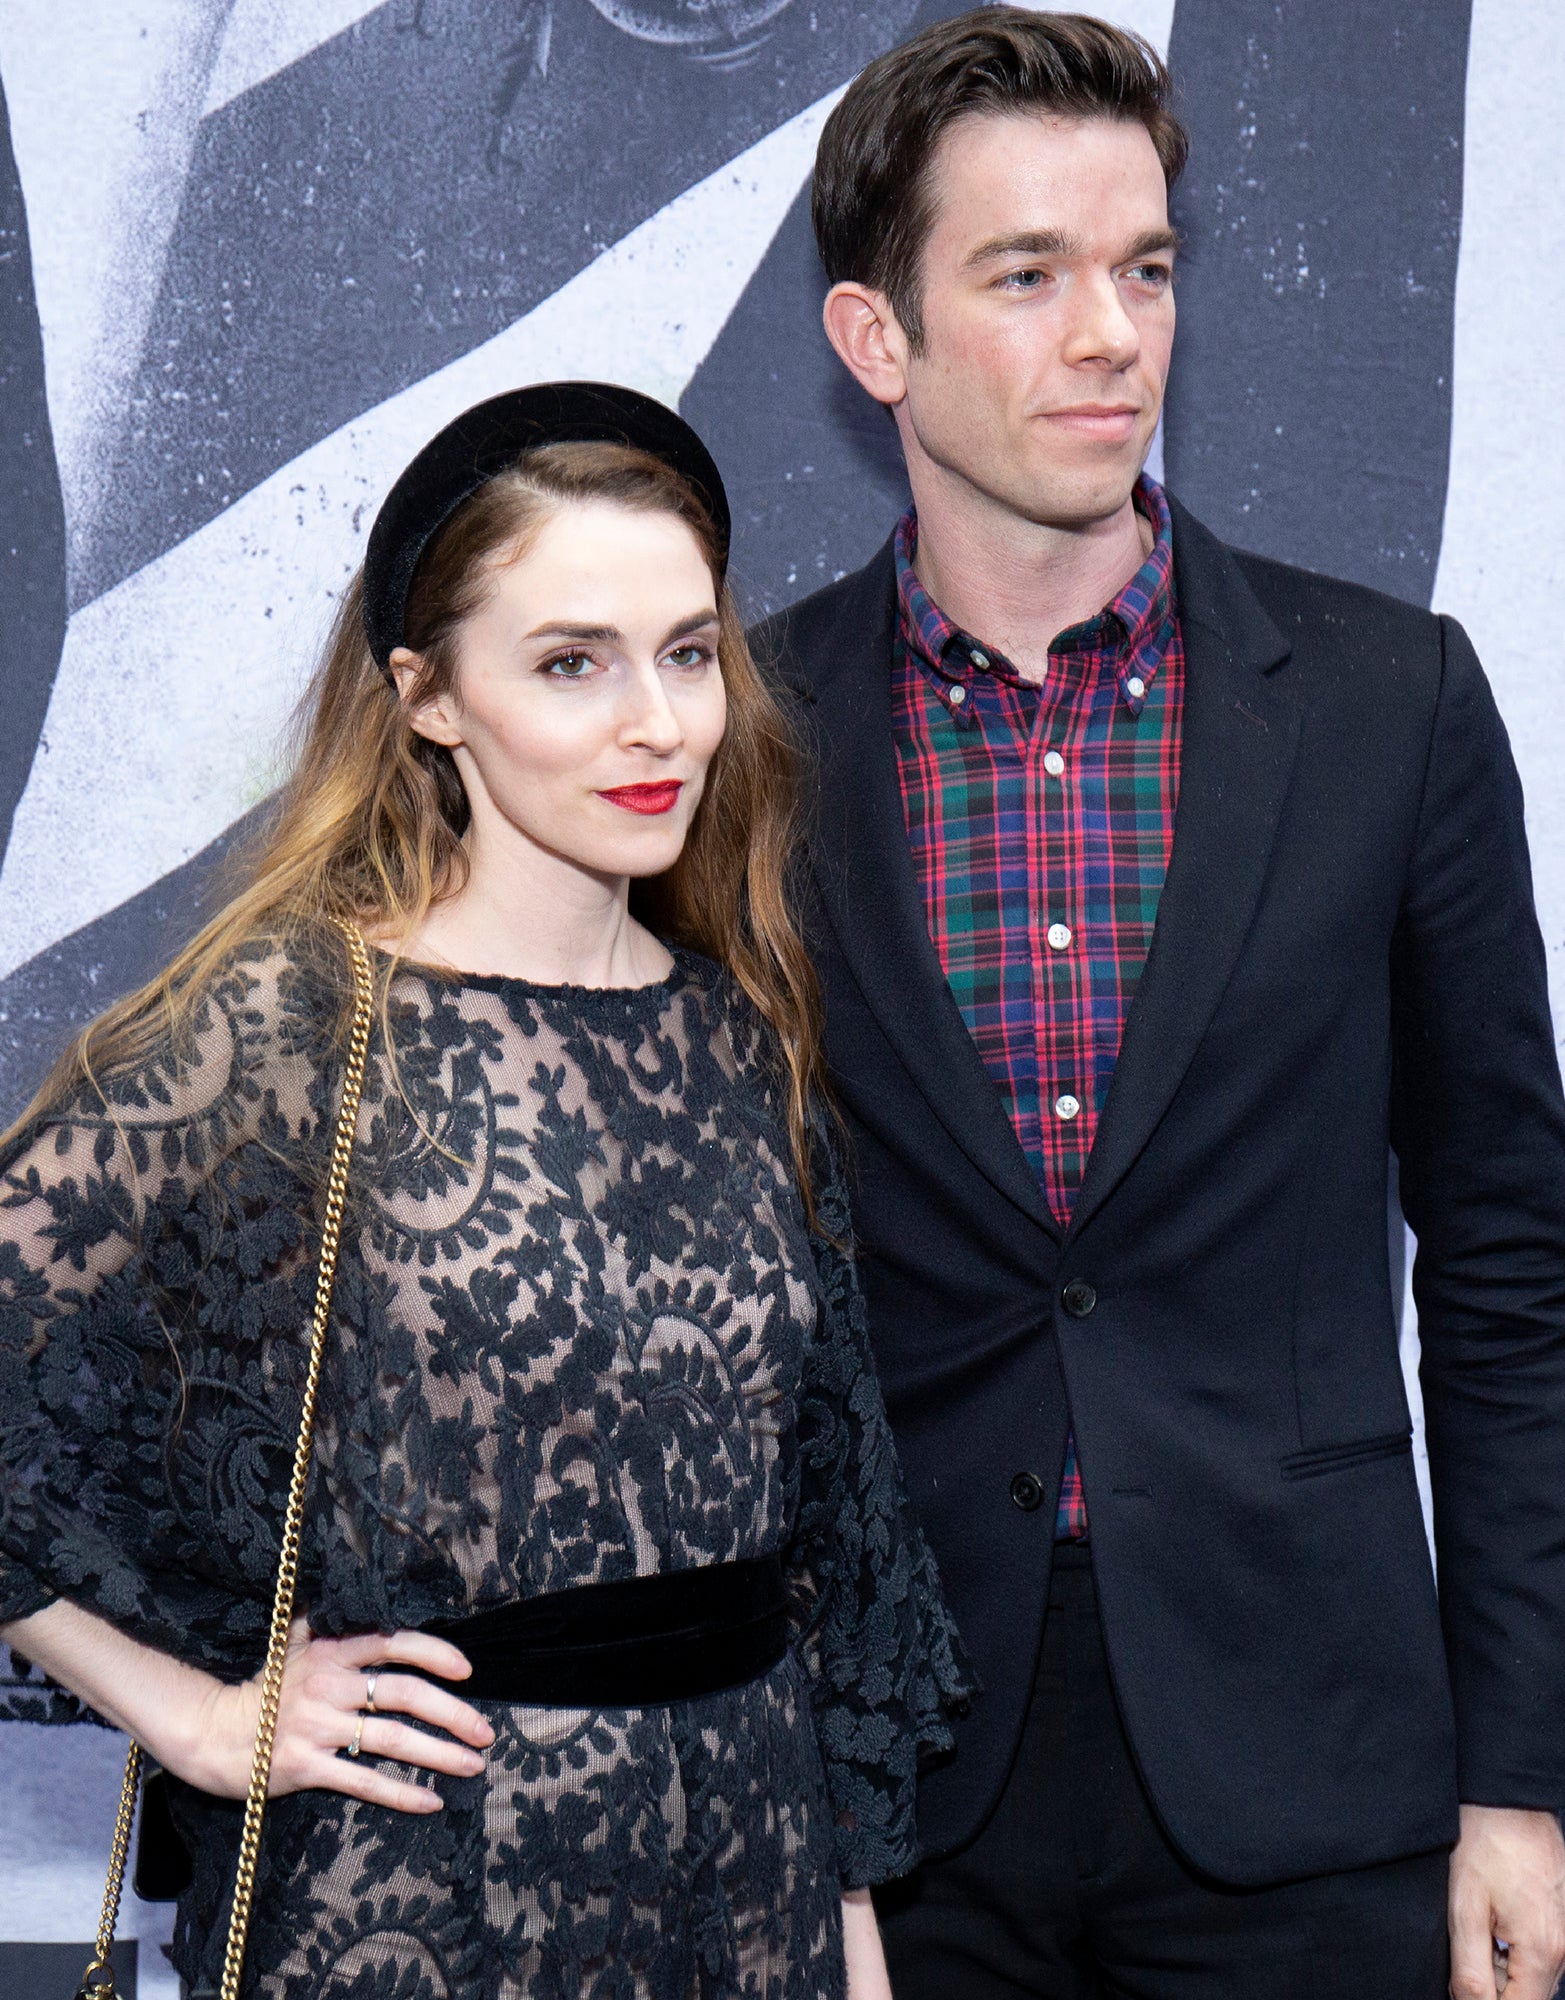 Anna Marie in a lace dress stands next to John who is wearing a plaid shirt and blazer at a formal event